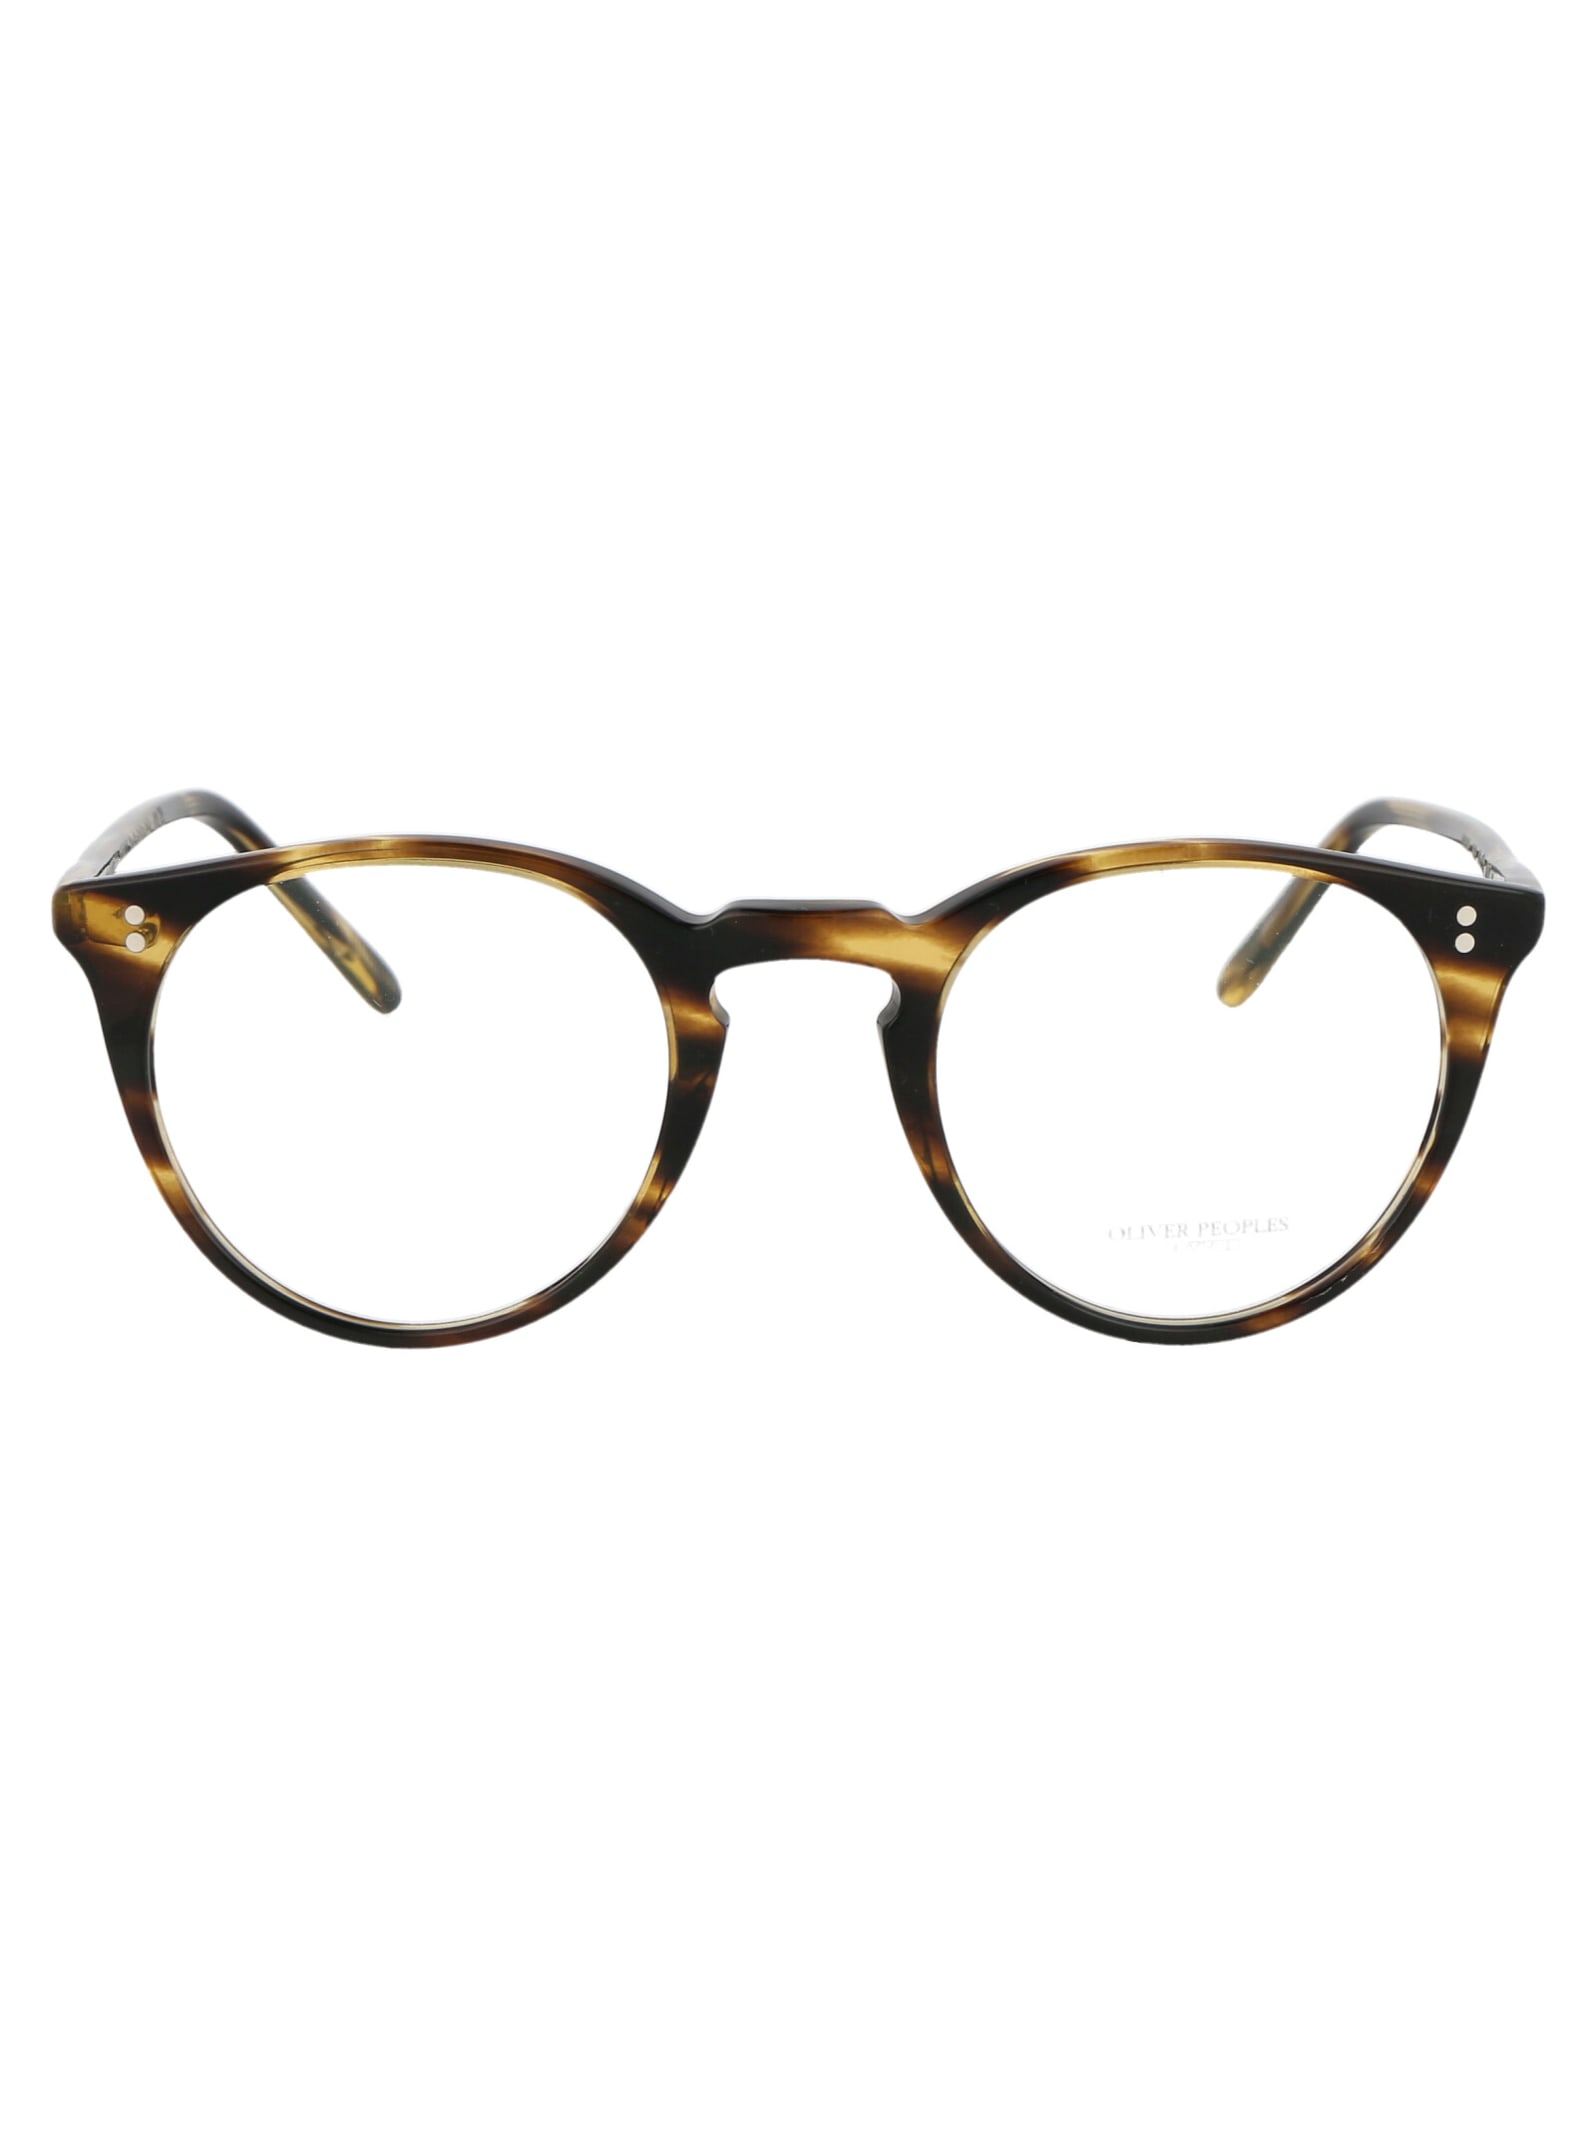 OLIVER PEOPLES OMALLEY GLASSES